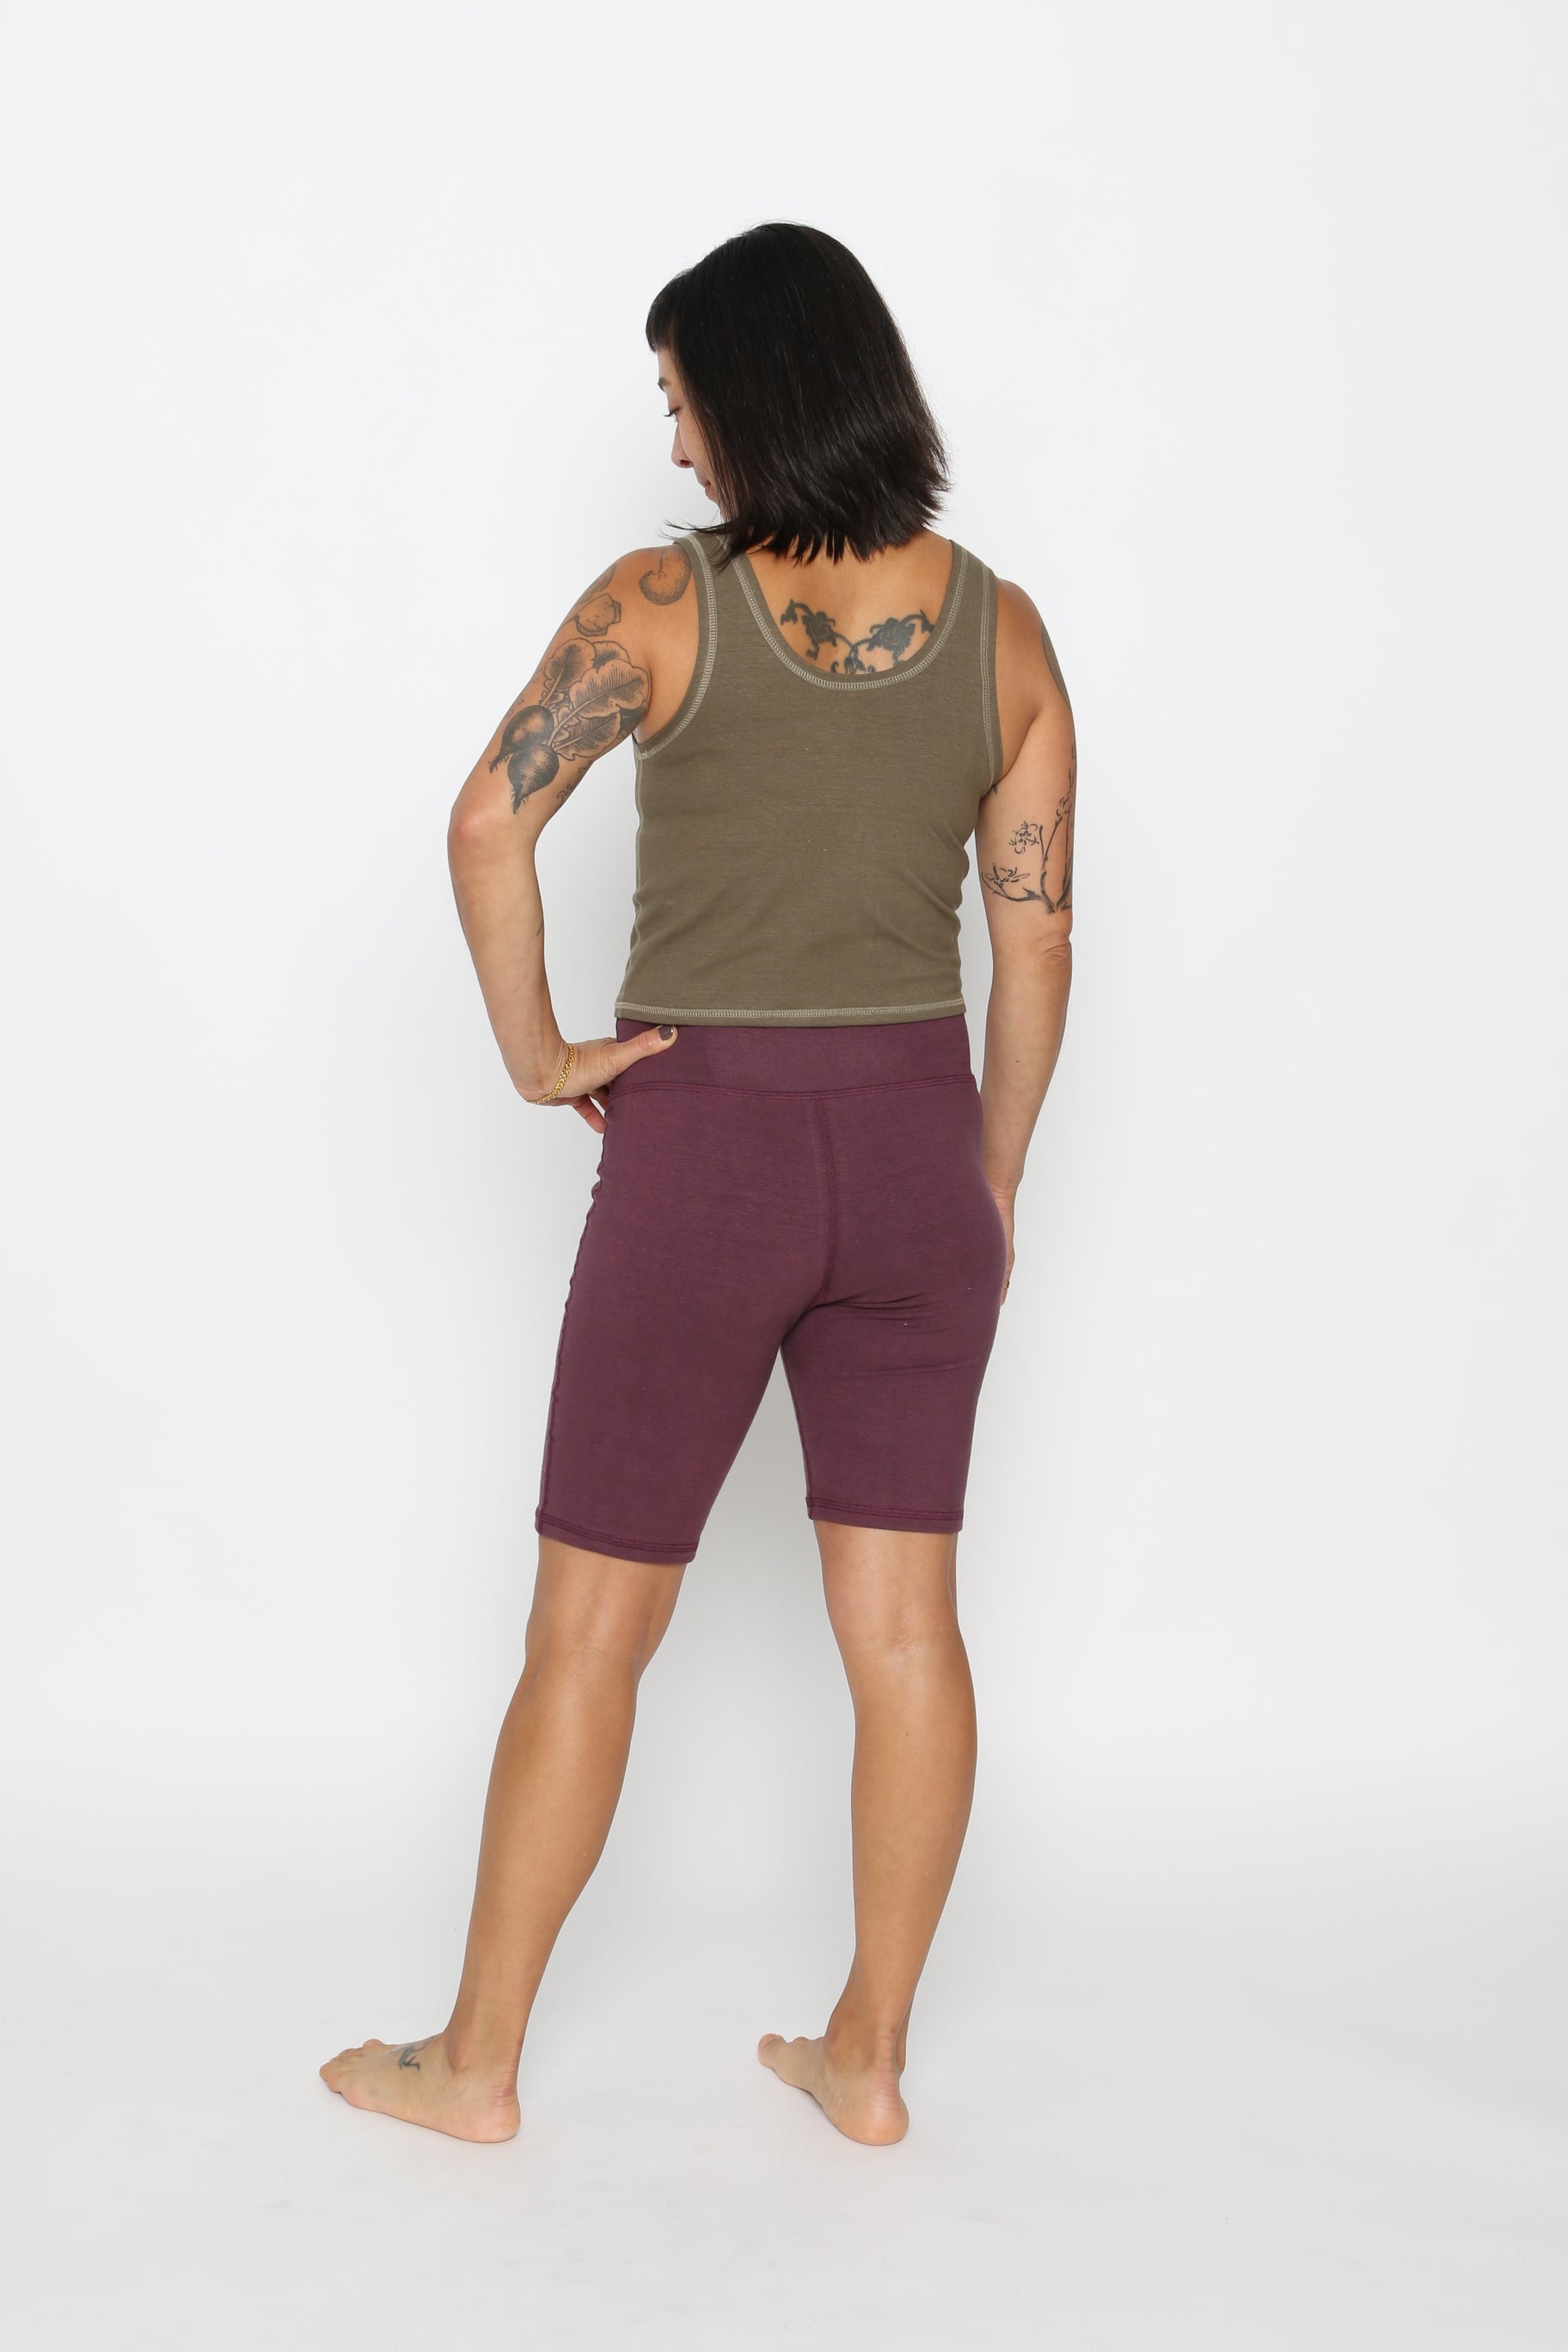 Christa is wearing a size S top and bottom. Her measurements are: Height 5&#39;5&quot; | Bust 34&quot; | Waist 27&quot; | Hip 37&quot;